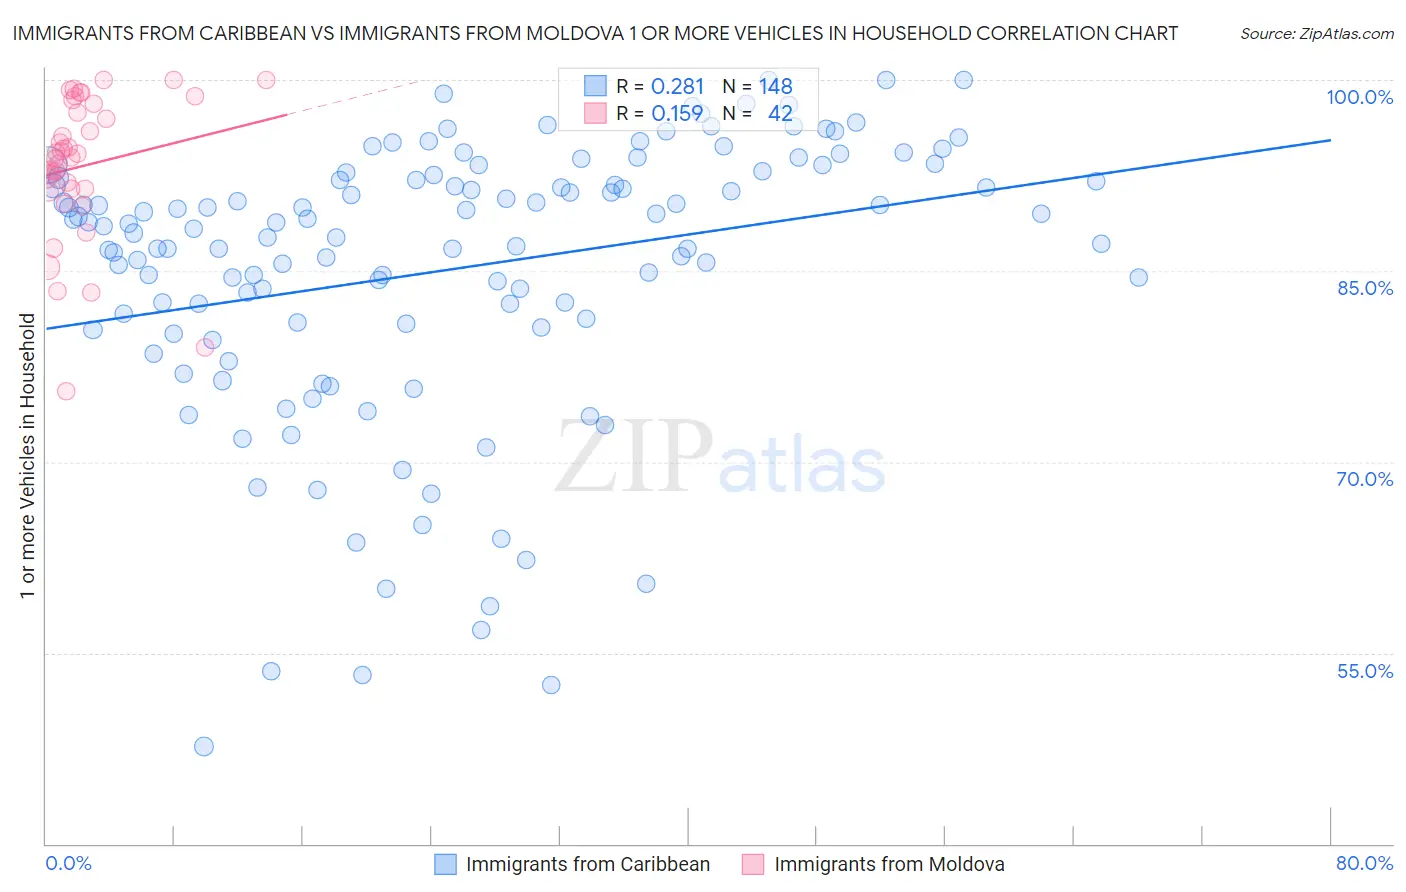 Immigrants from Caribbean vs Immigrants from Moldova 1 or more Vehicles in Household